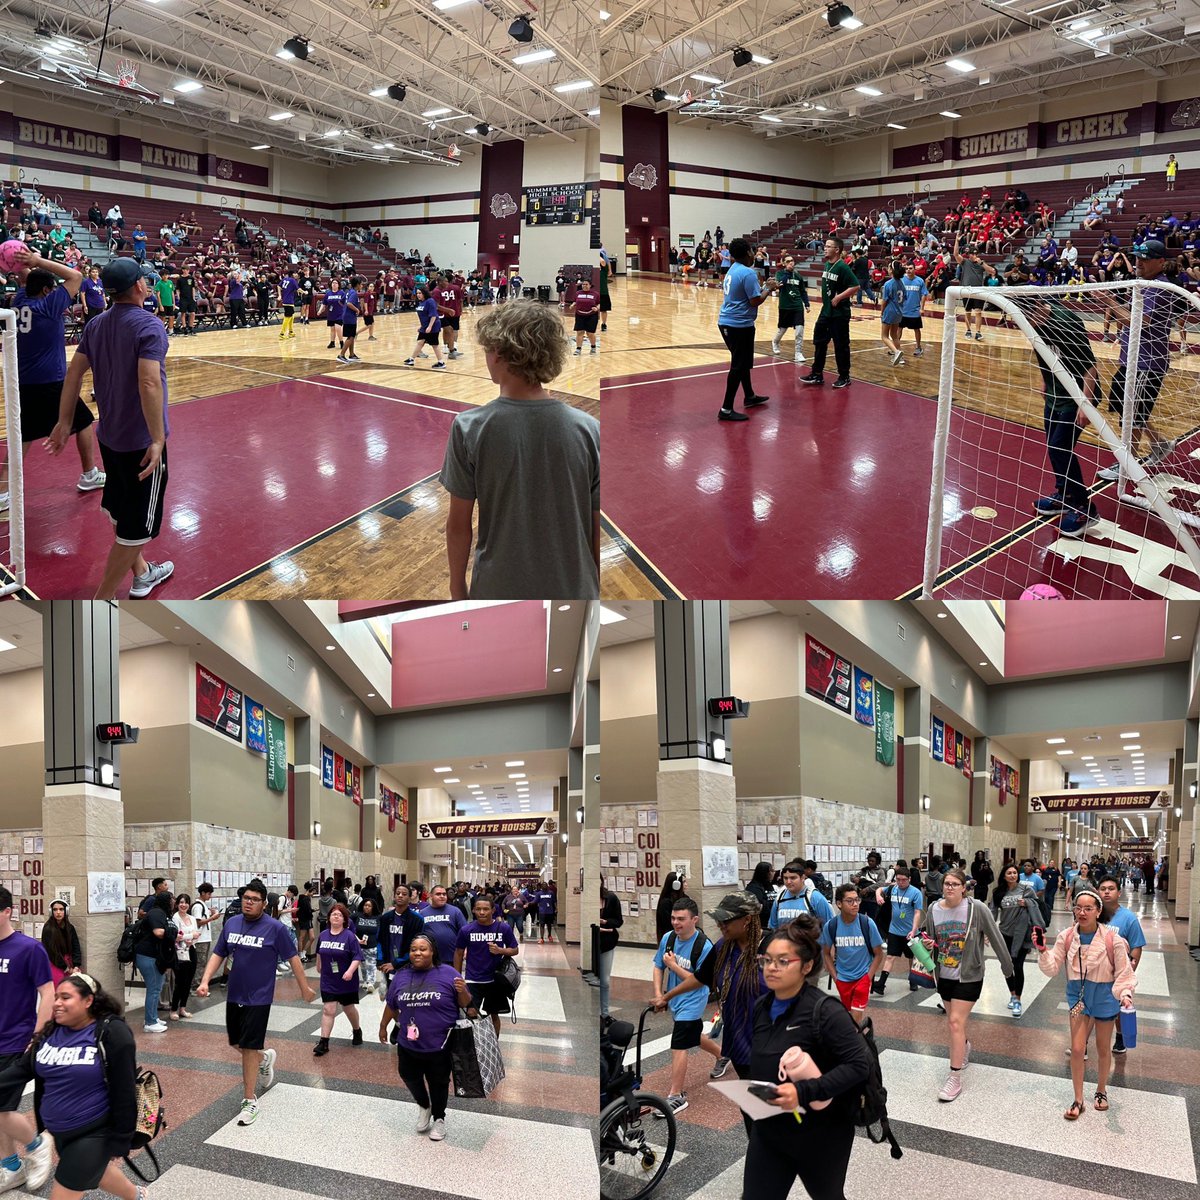 SCHS hosted the Integrated Athletics Soccer Tournament today and we had a great time cheering on our students from around the district! 🎉🤩 A big shoutout and thank you to our band, cheerleaders, Starlettes, Paw Pals, state qualifiers, teachers and coaches!